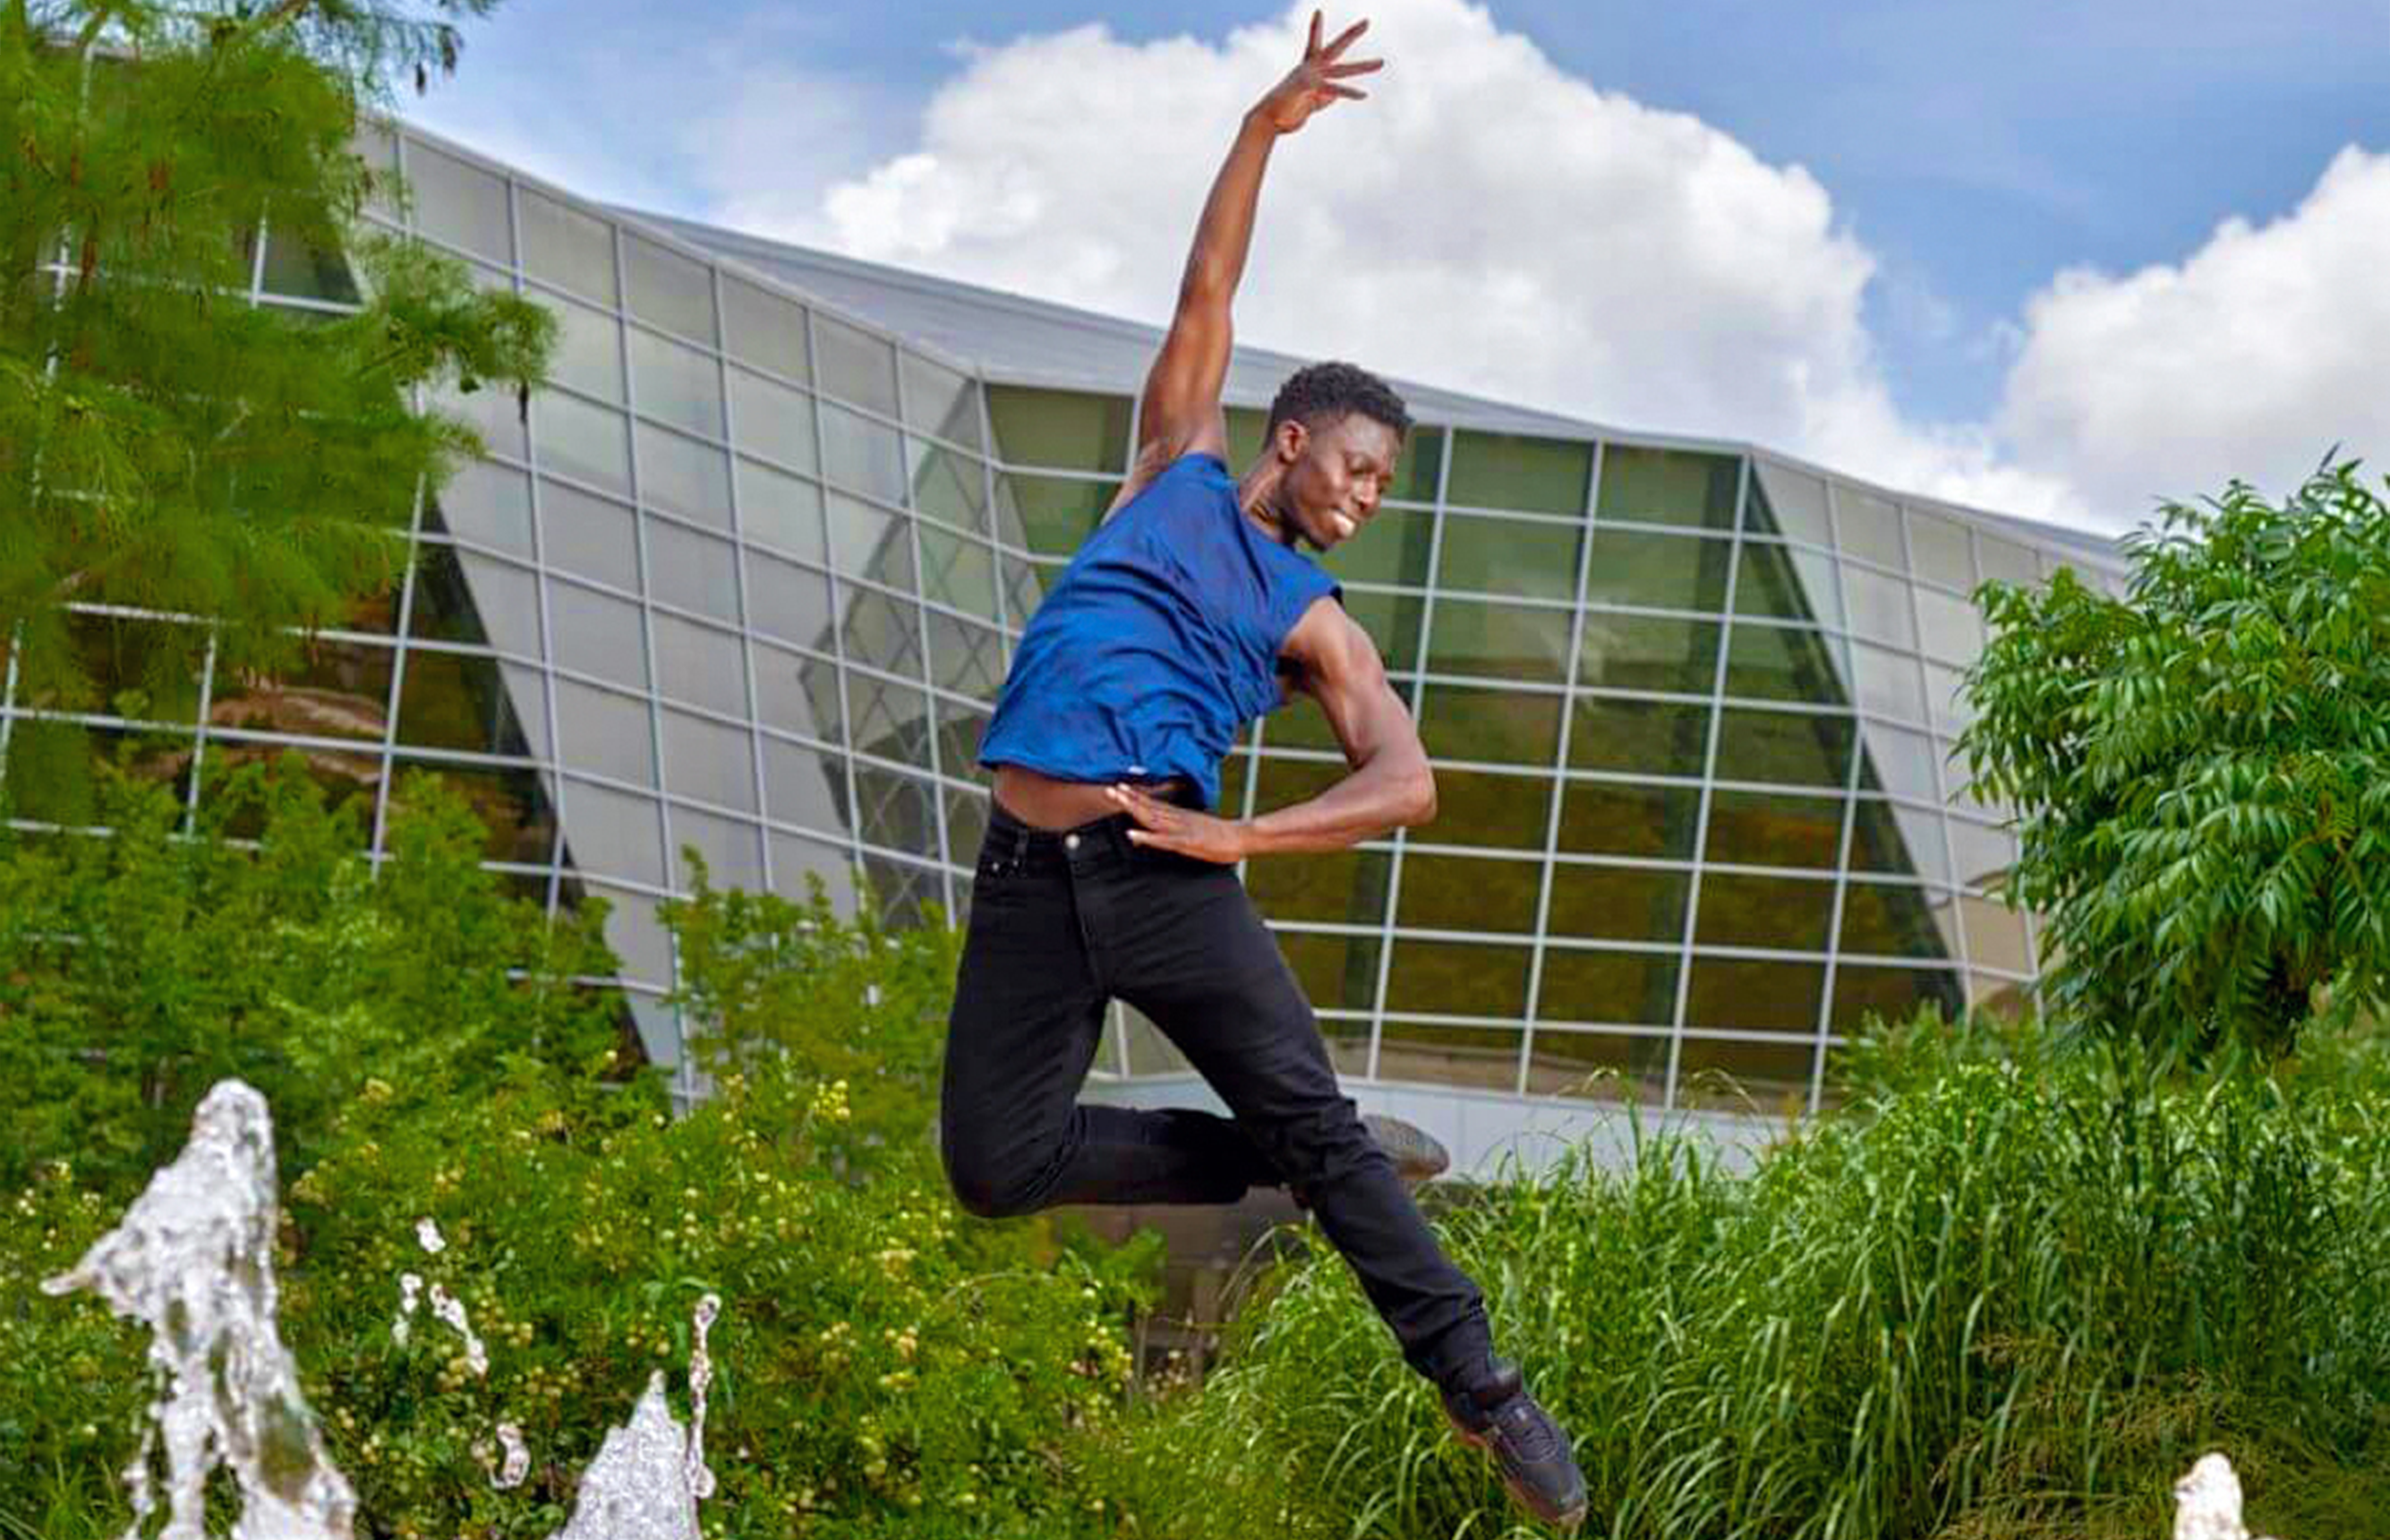 Brooklyn Mack soars in a retire saute, arms in high fourth, over a water fountain pad outside. A modern glass-window exterior building, trees and a blue sky are in the background. Mack wears a blue tank top, black tights and black ballet slippers.